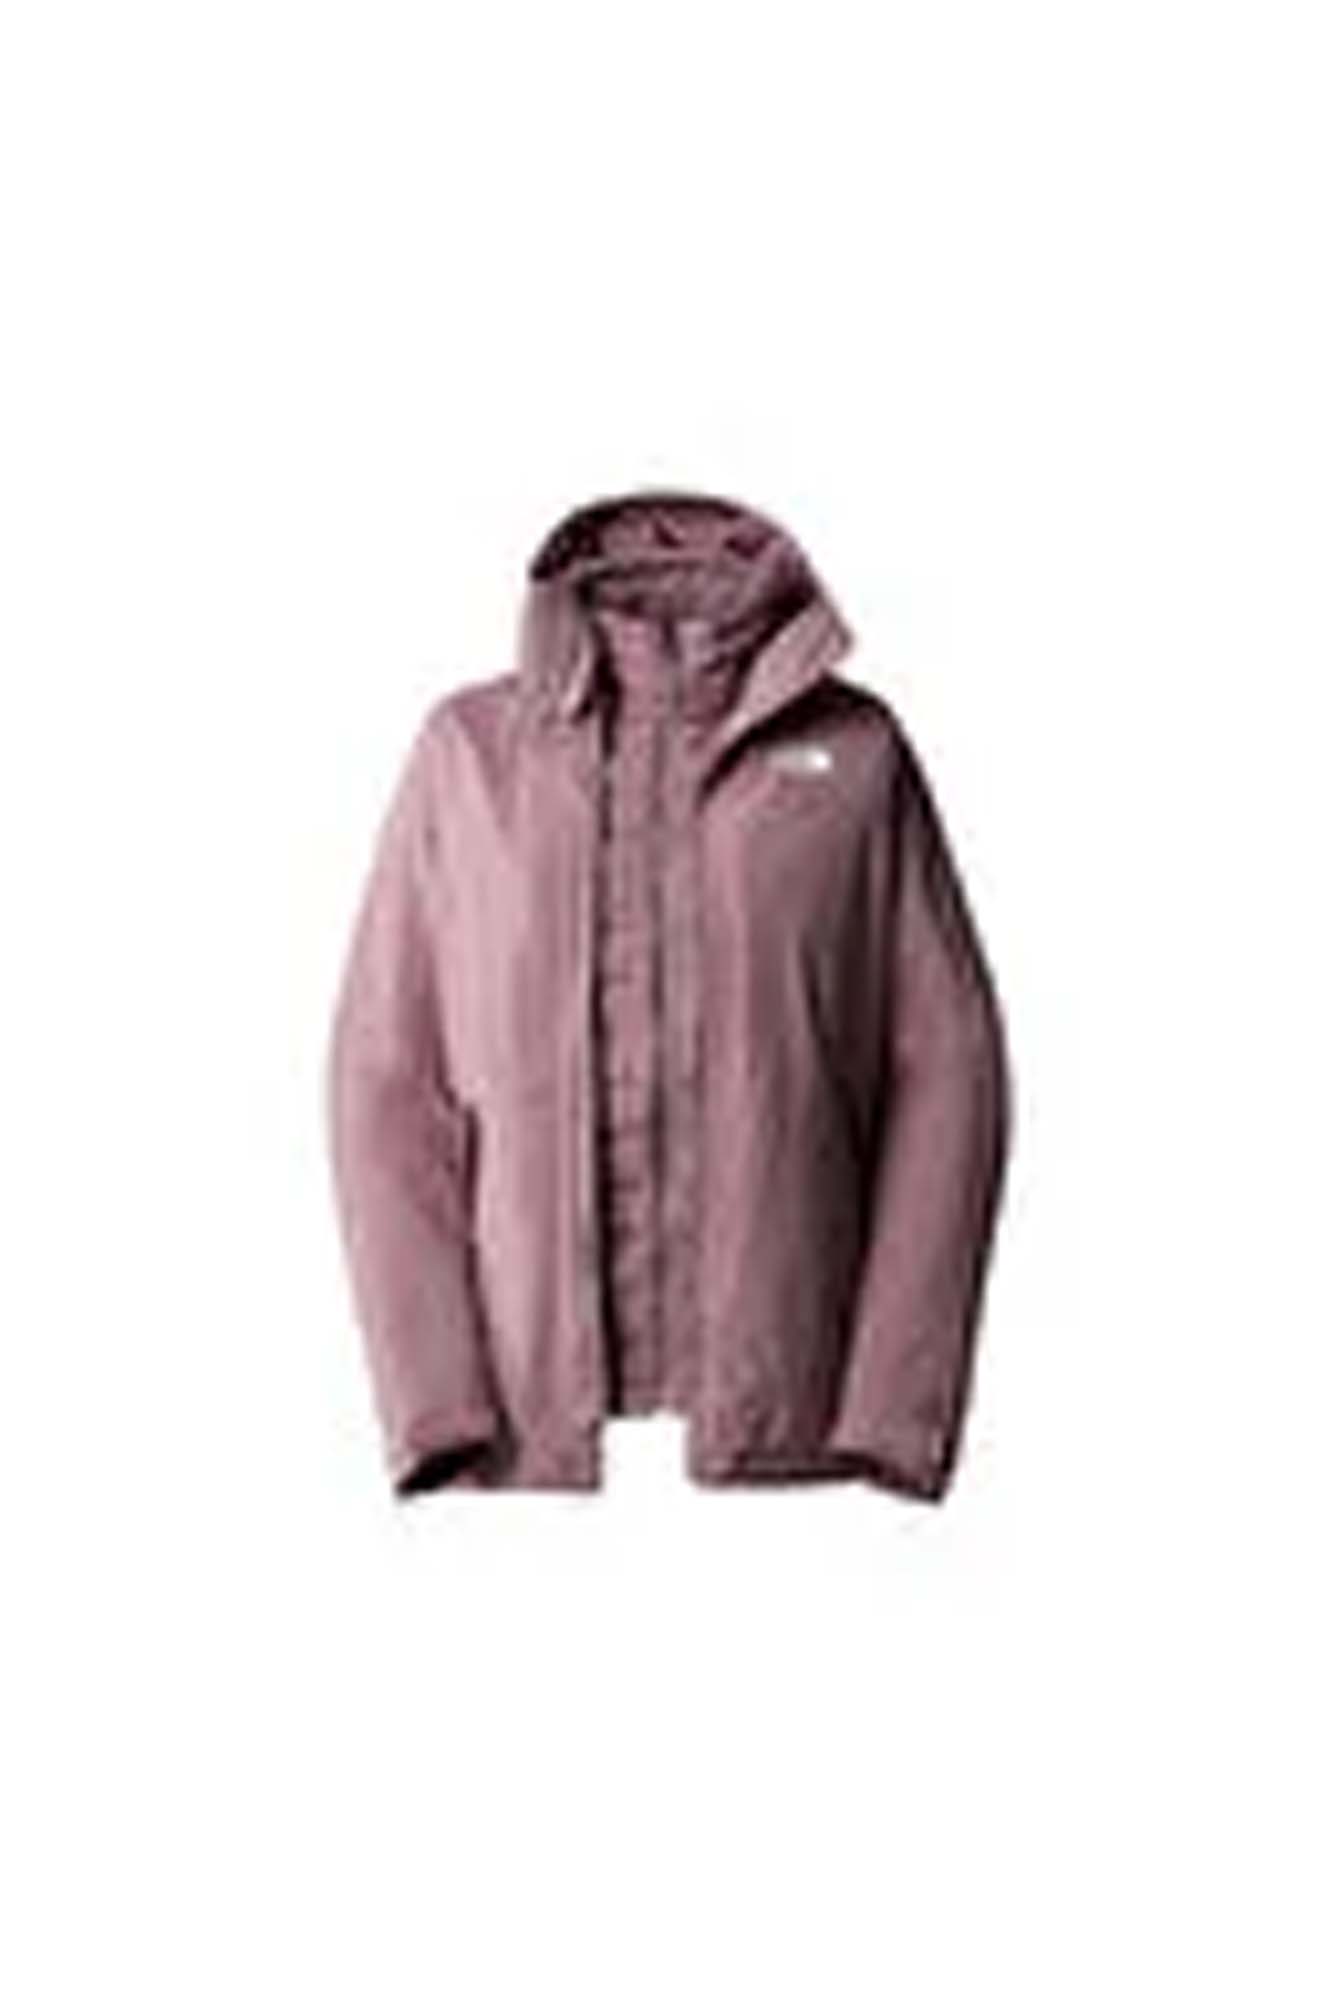 THE NORTH FACE carto triclimate jacket